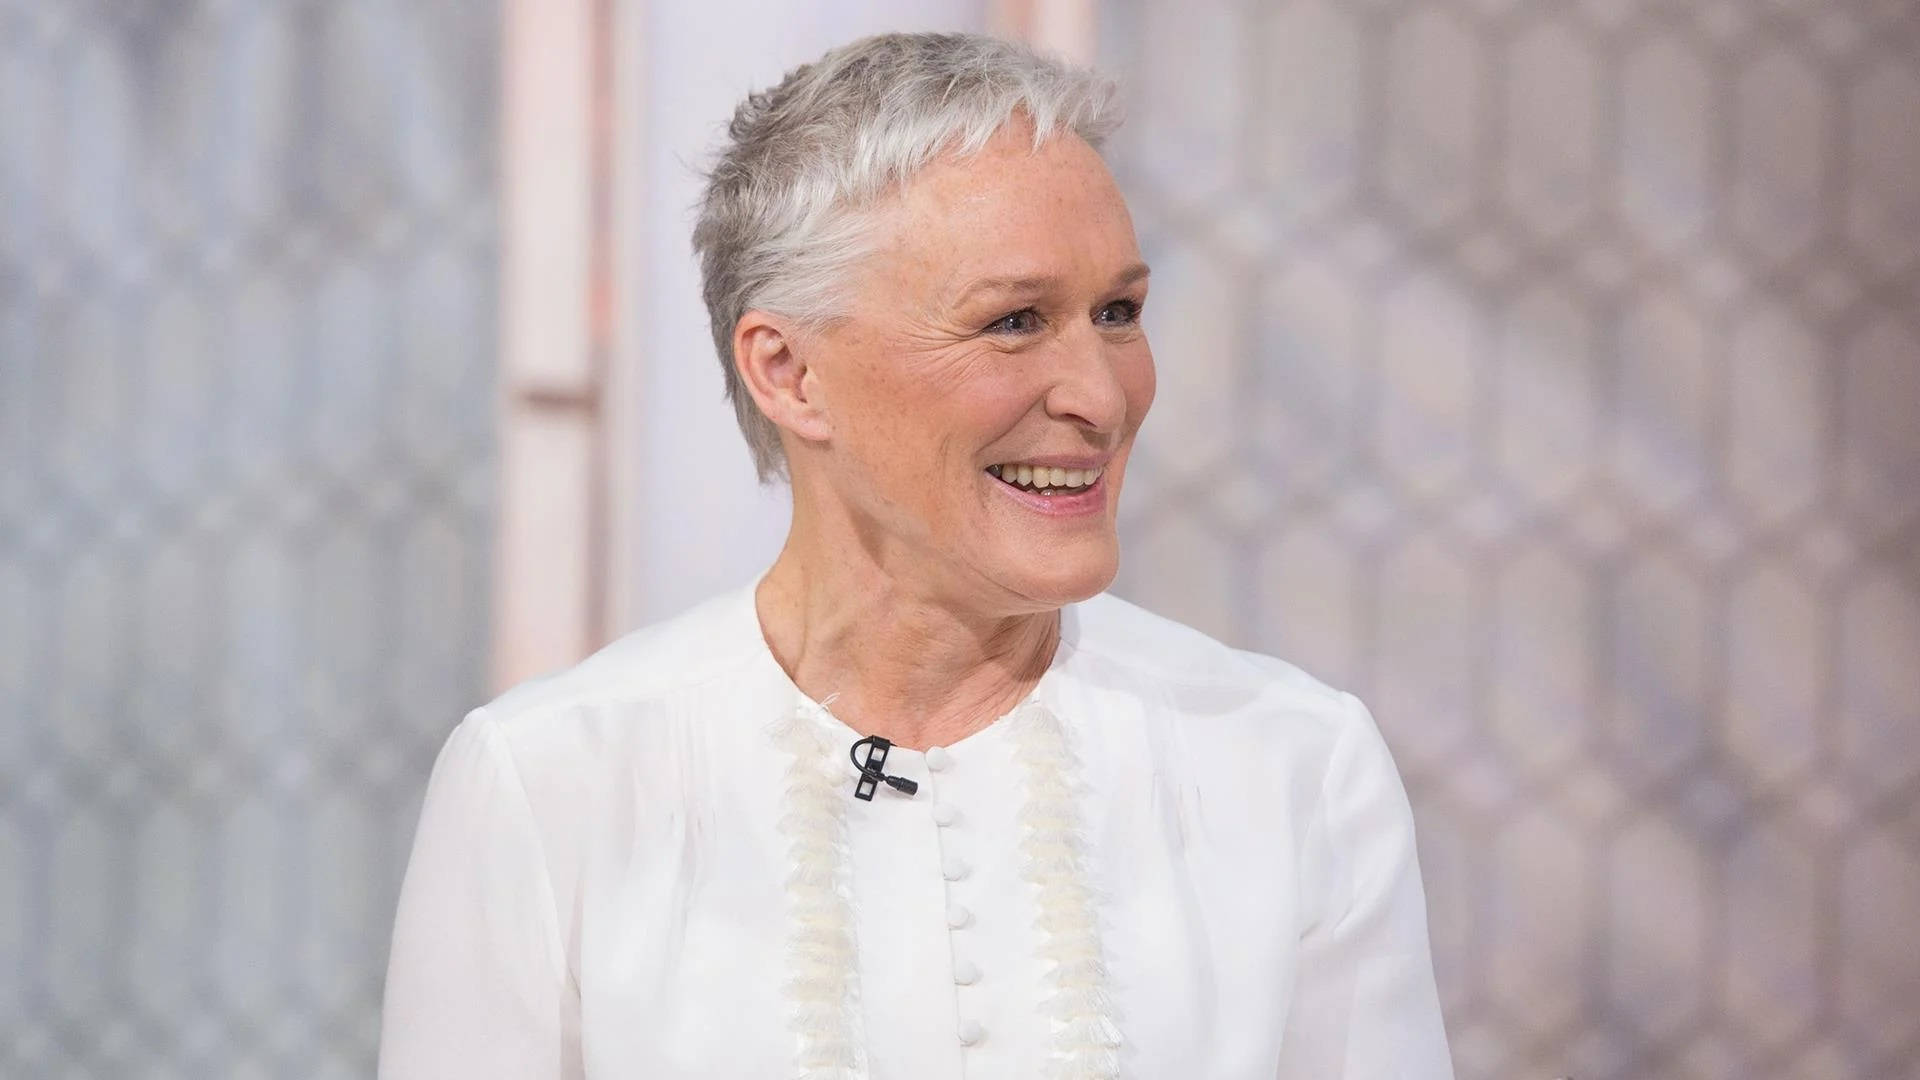 Glennclose In Der Today Show Wallpaper